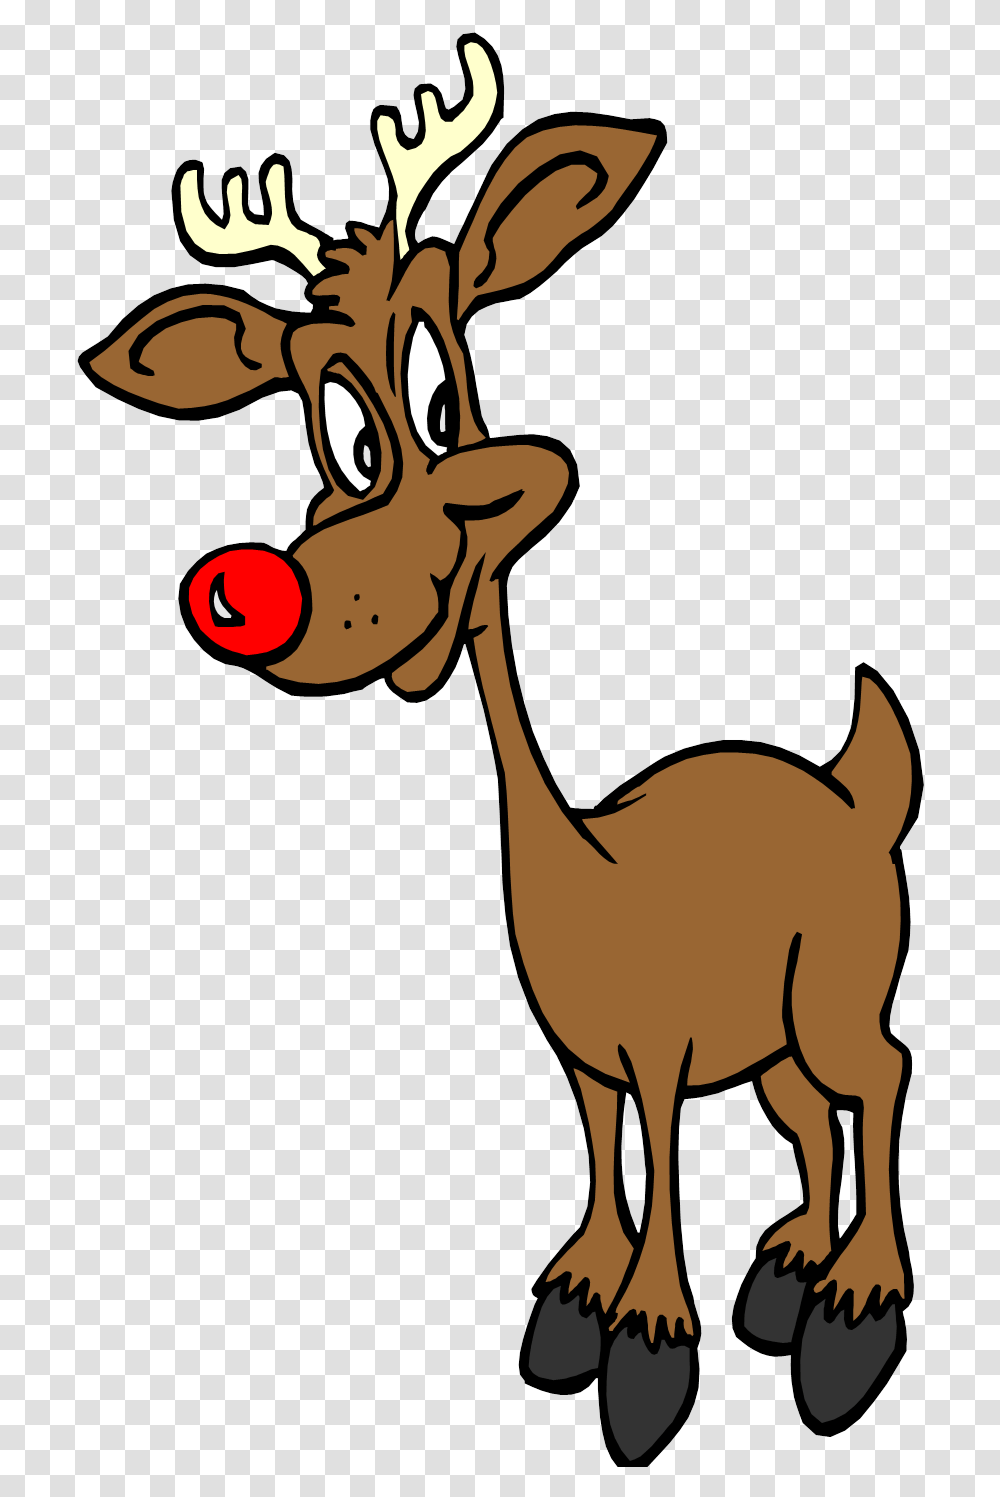 Rudolph The Red Nosed Reindeer Rudolph The Red Nosed Reindeer Graphic, Animal, Reptile, Dinosaur, Antelope Transparent Png